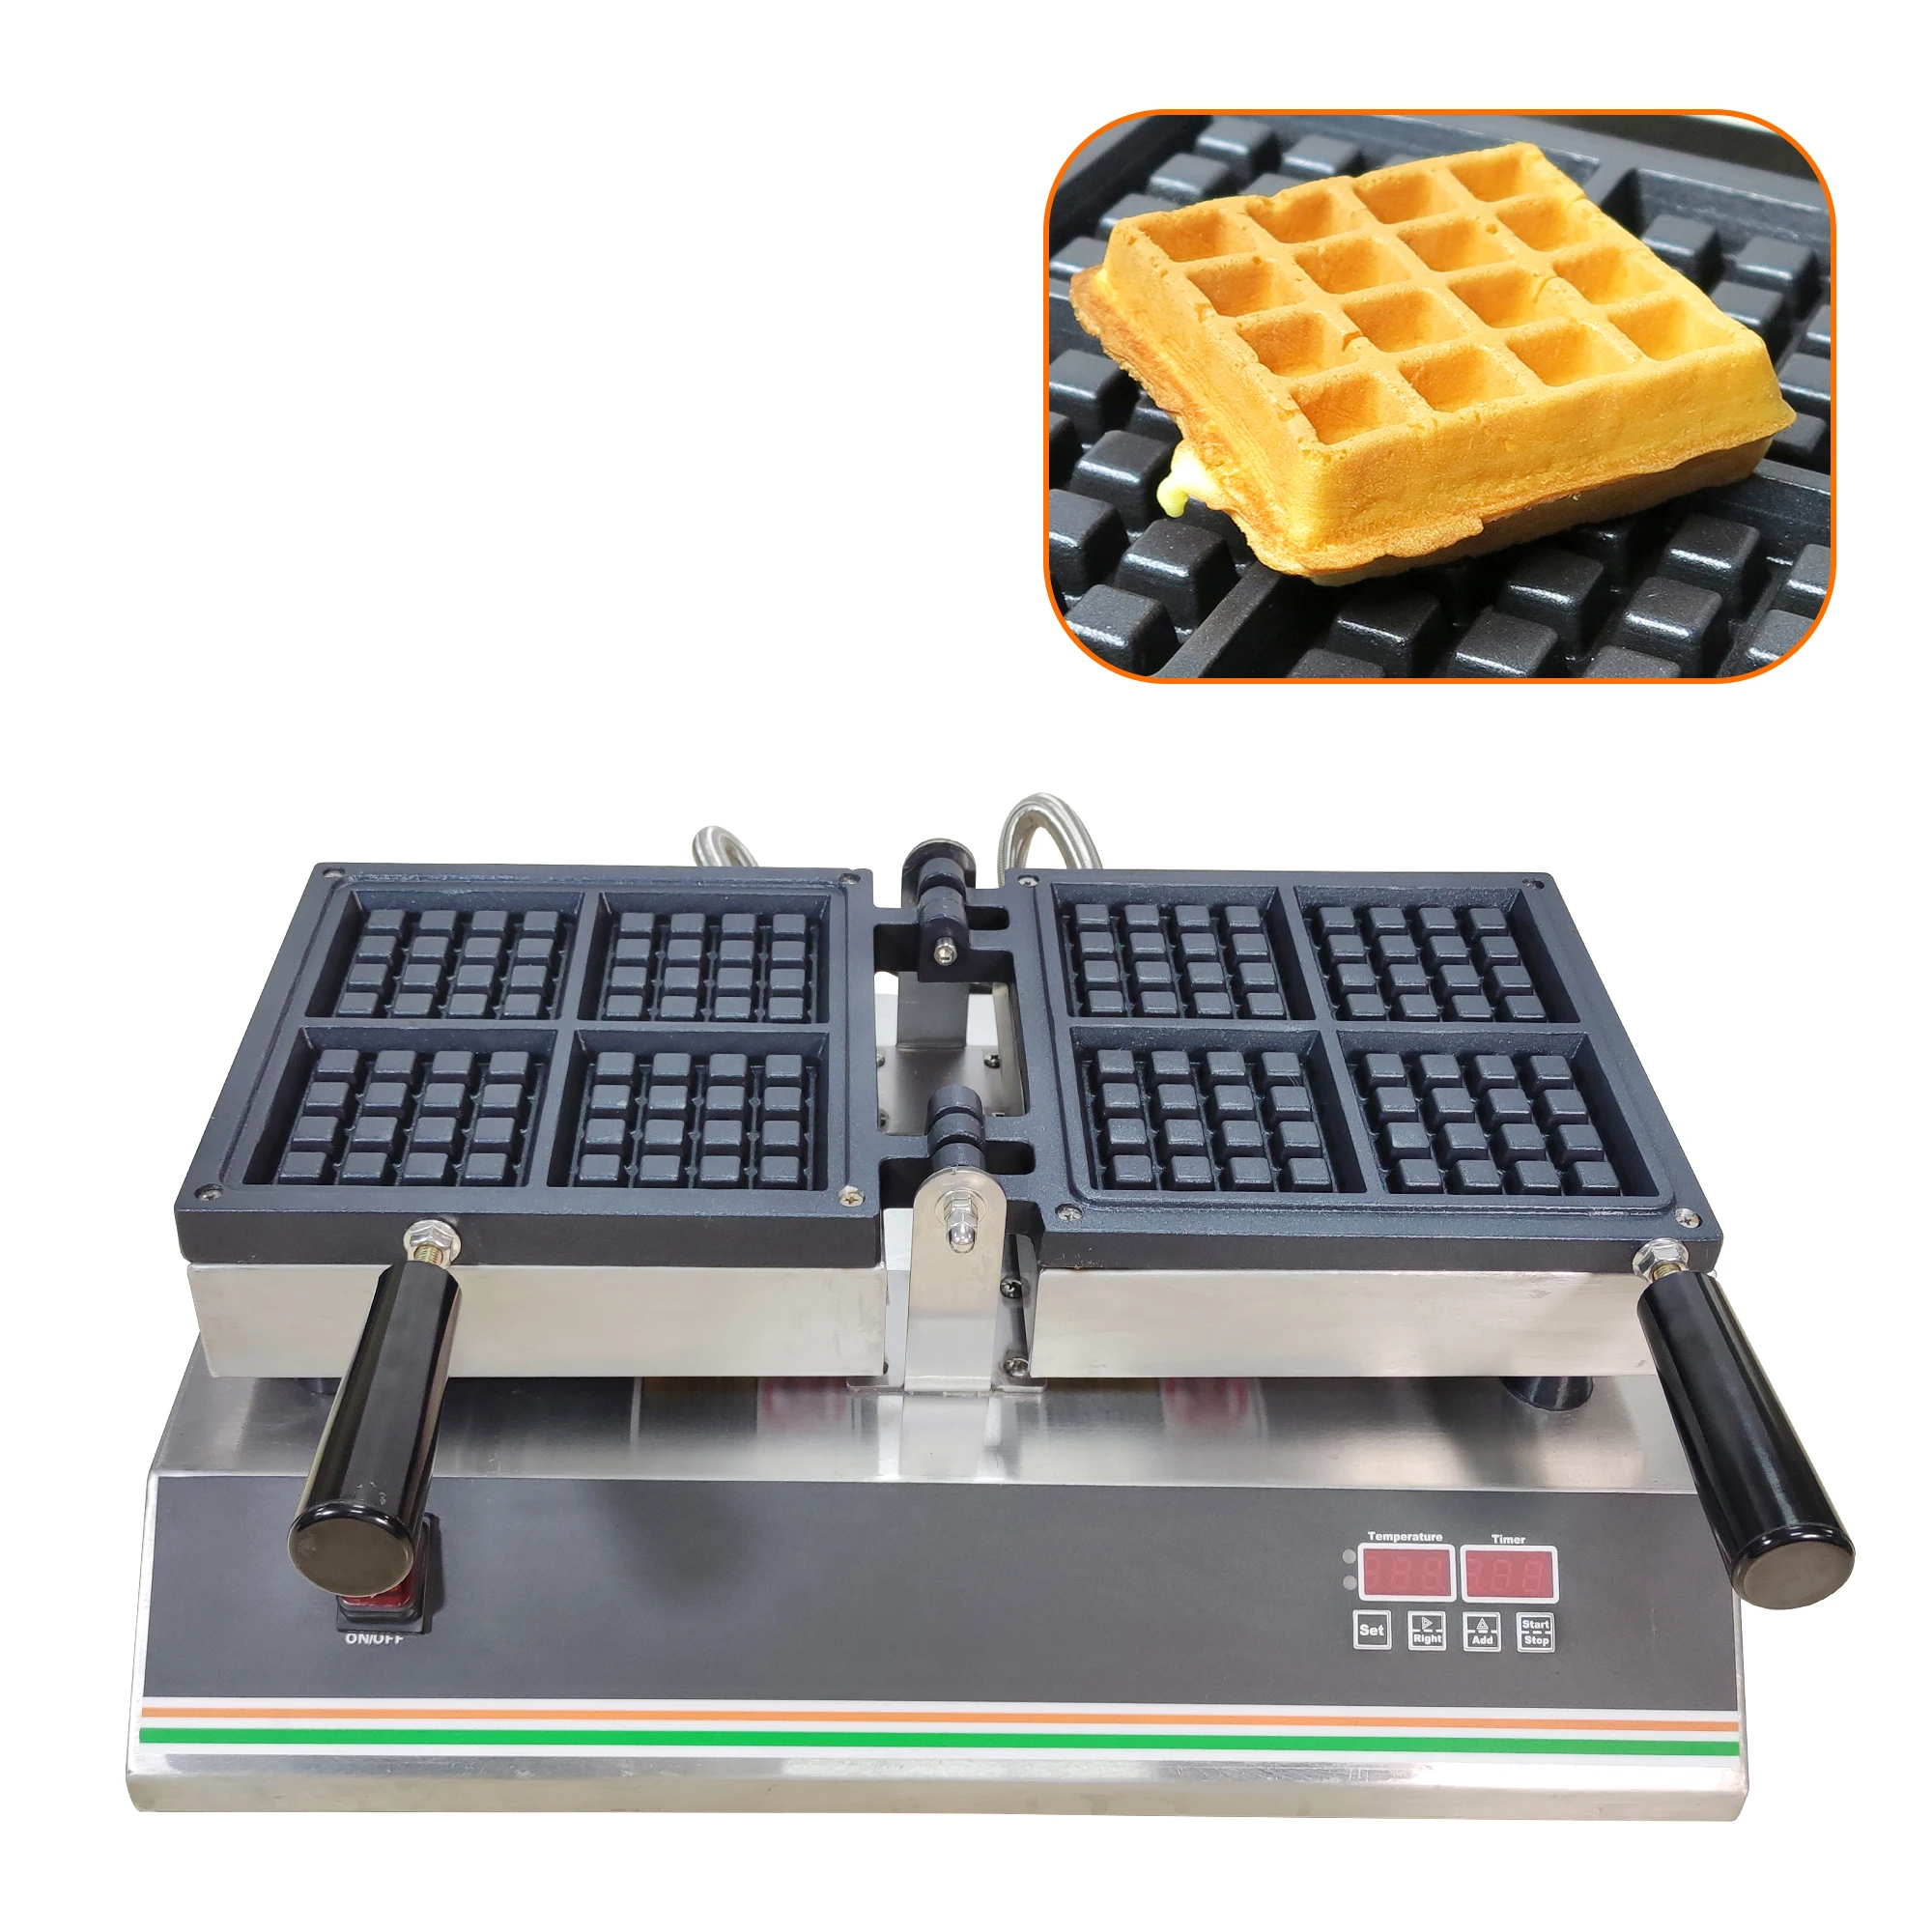 

Snack Machines Waffle Maker Commerical Non-stick 4 Slice Square Shape Waffle Machine For 220V or 110V